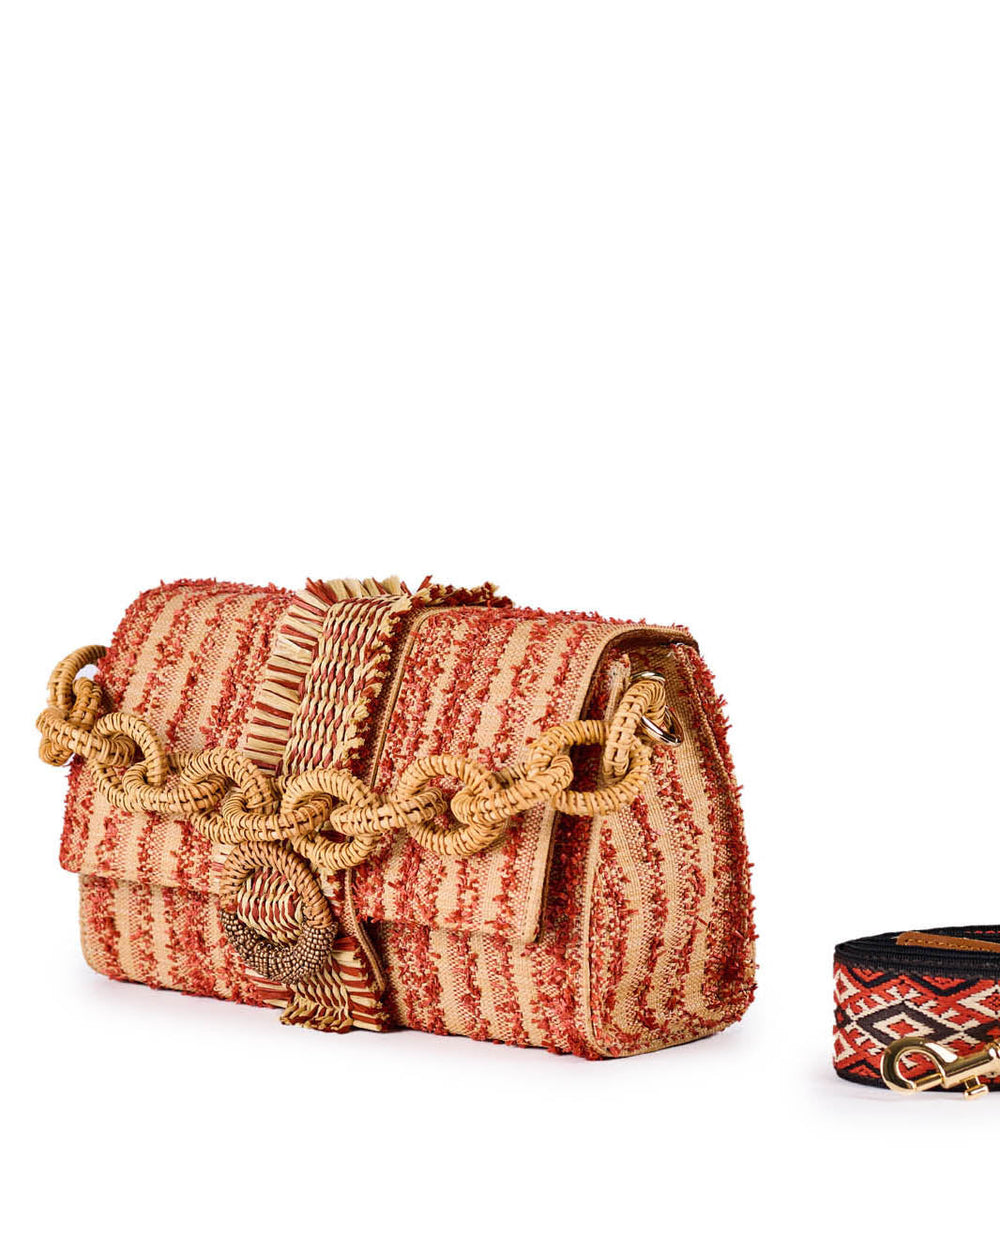 Red and beige woven handbag with decorative chain and matching strap